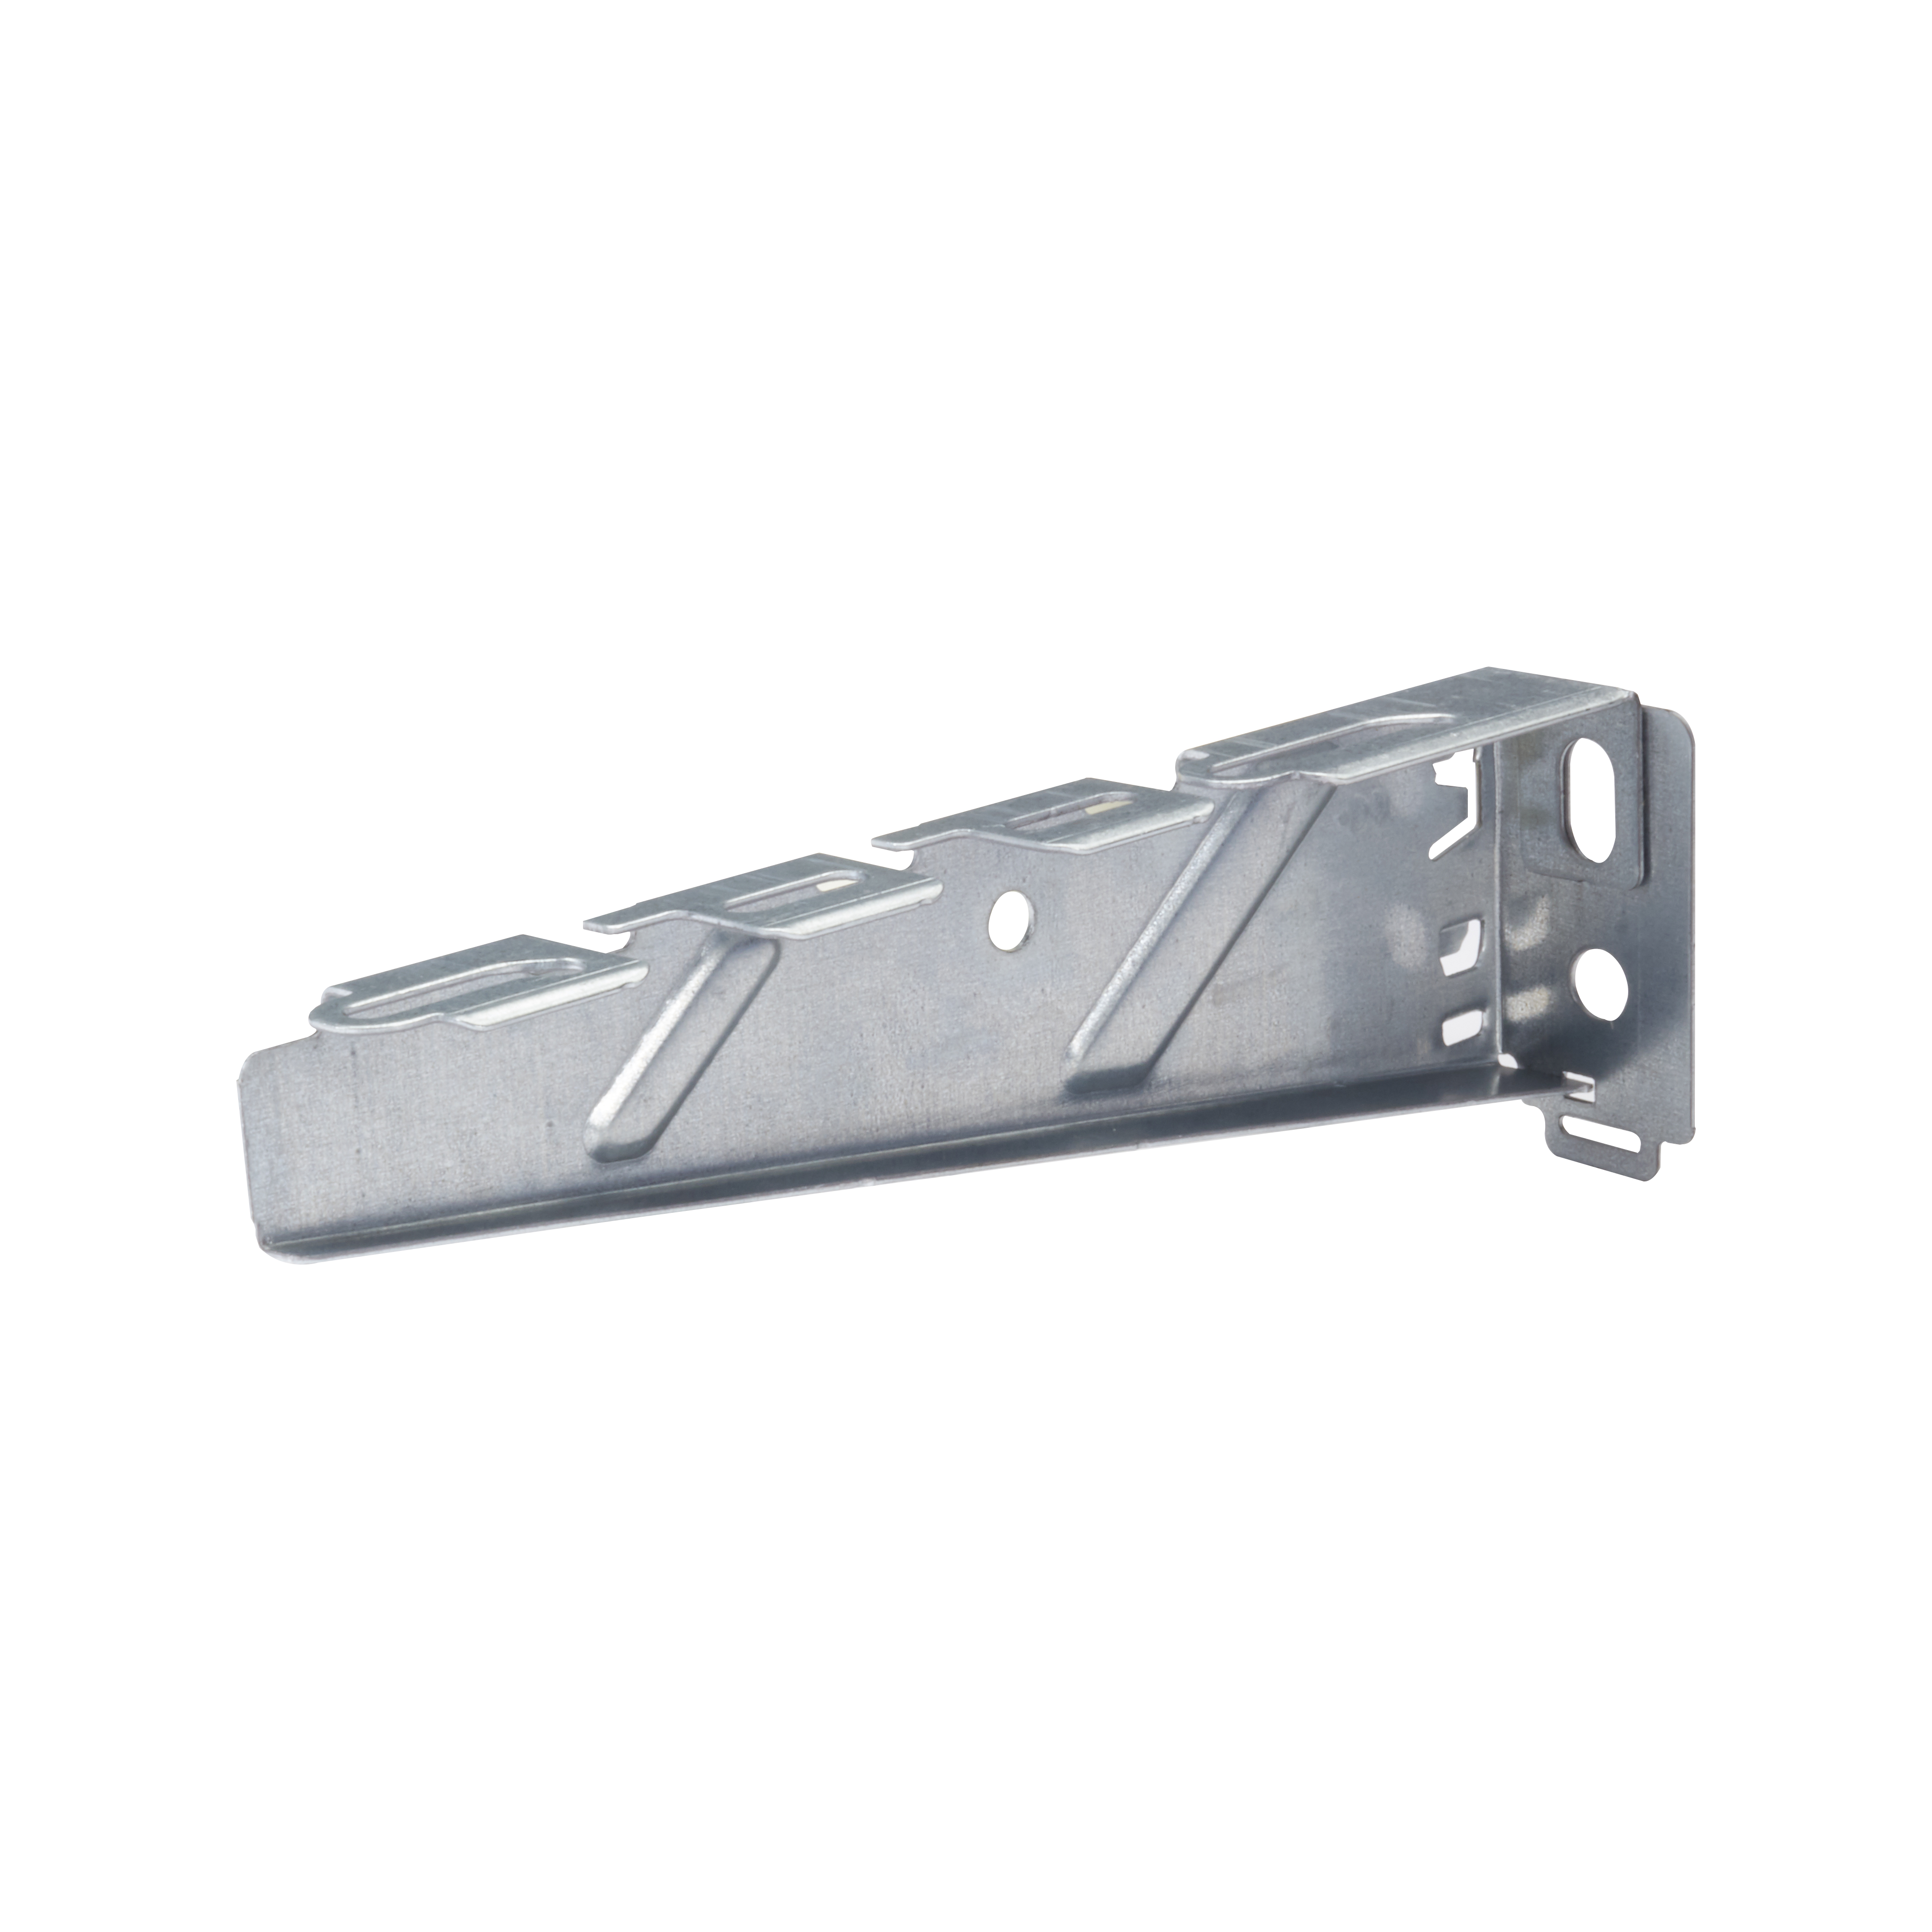 Fiberglass Cable Wall Bracket For Cable Tray Buy Cable Bracket Wall ...